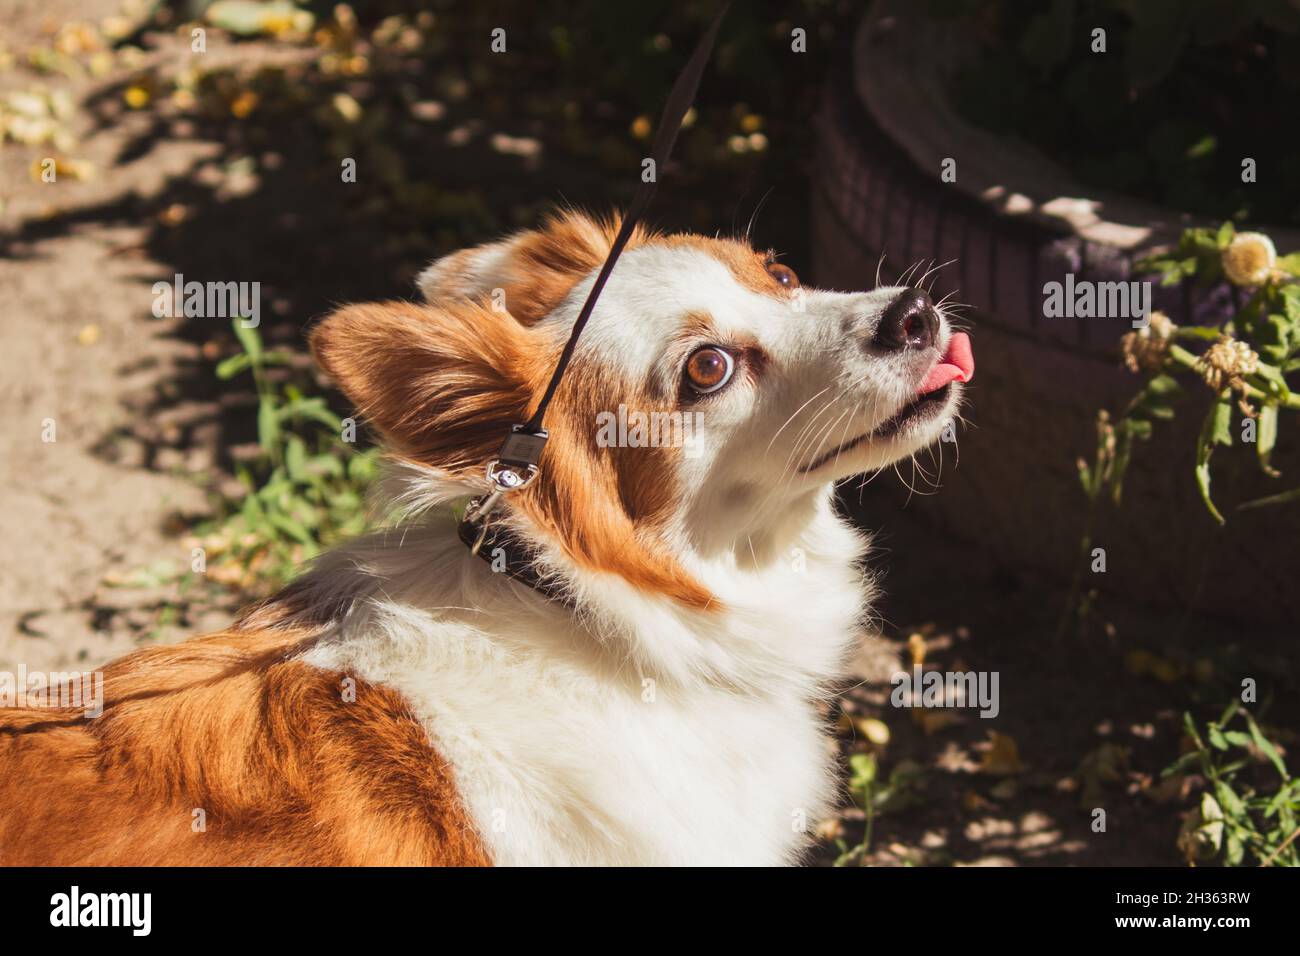 A long-haired dog on a leash stuck out his tongue outside in sunny weather.  Stock Photo